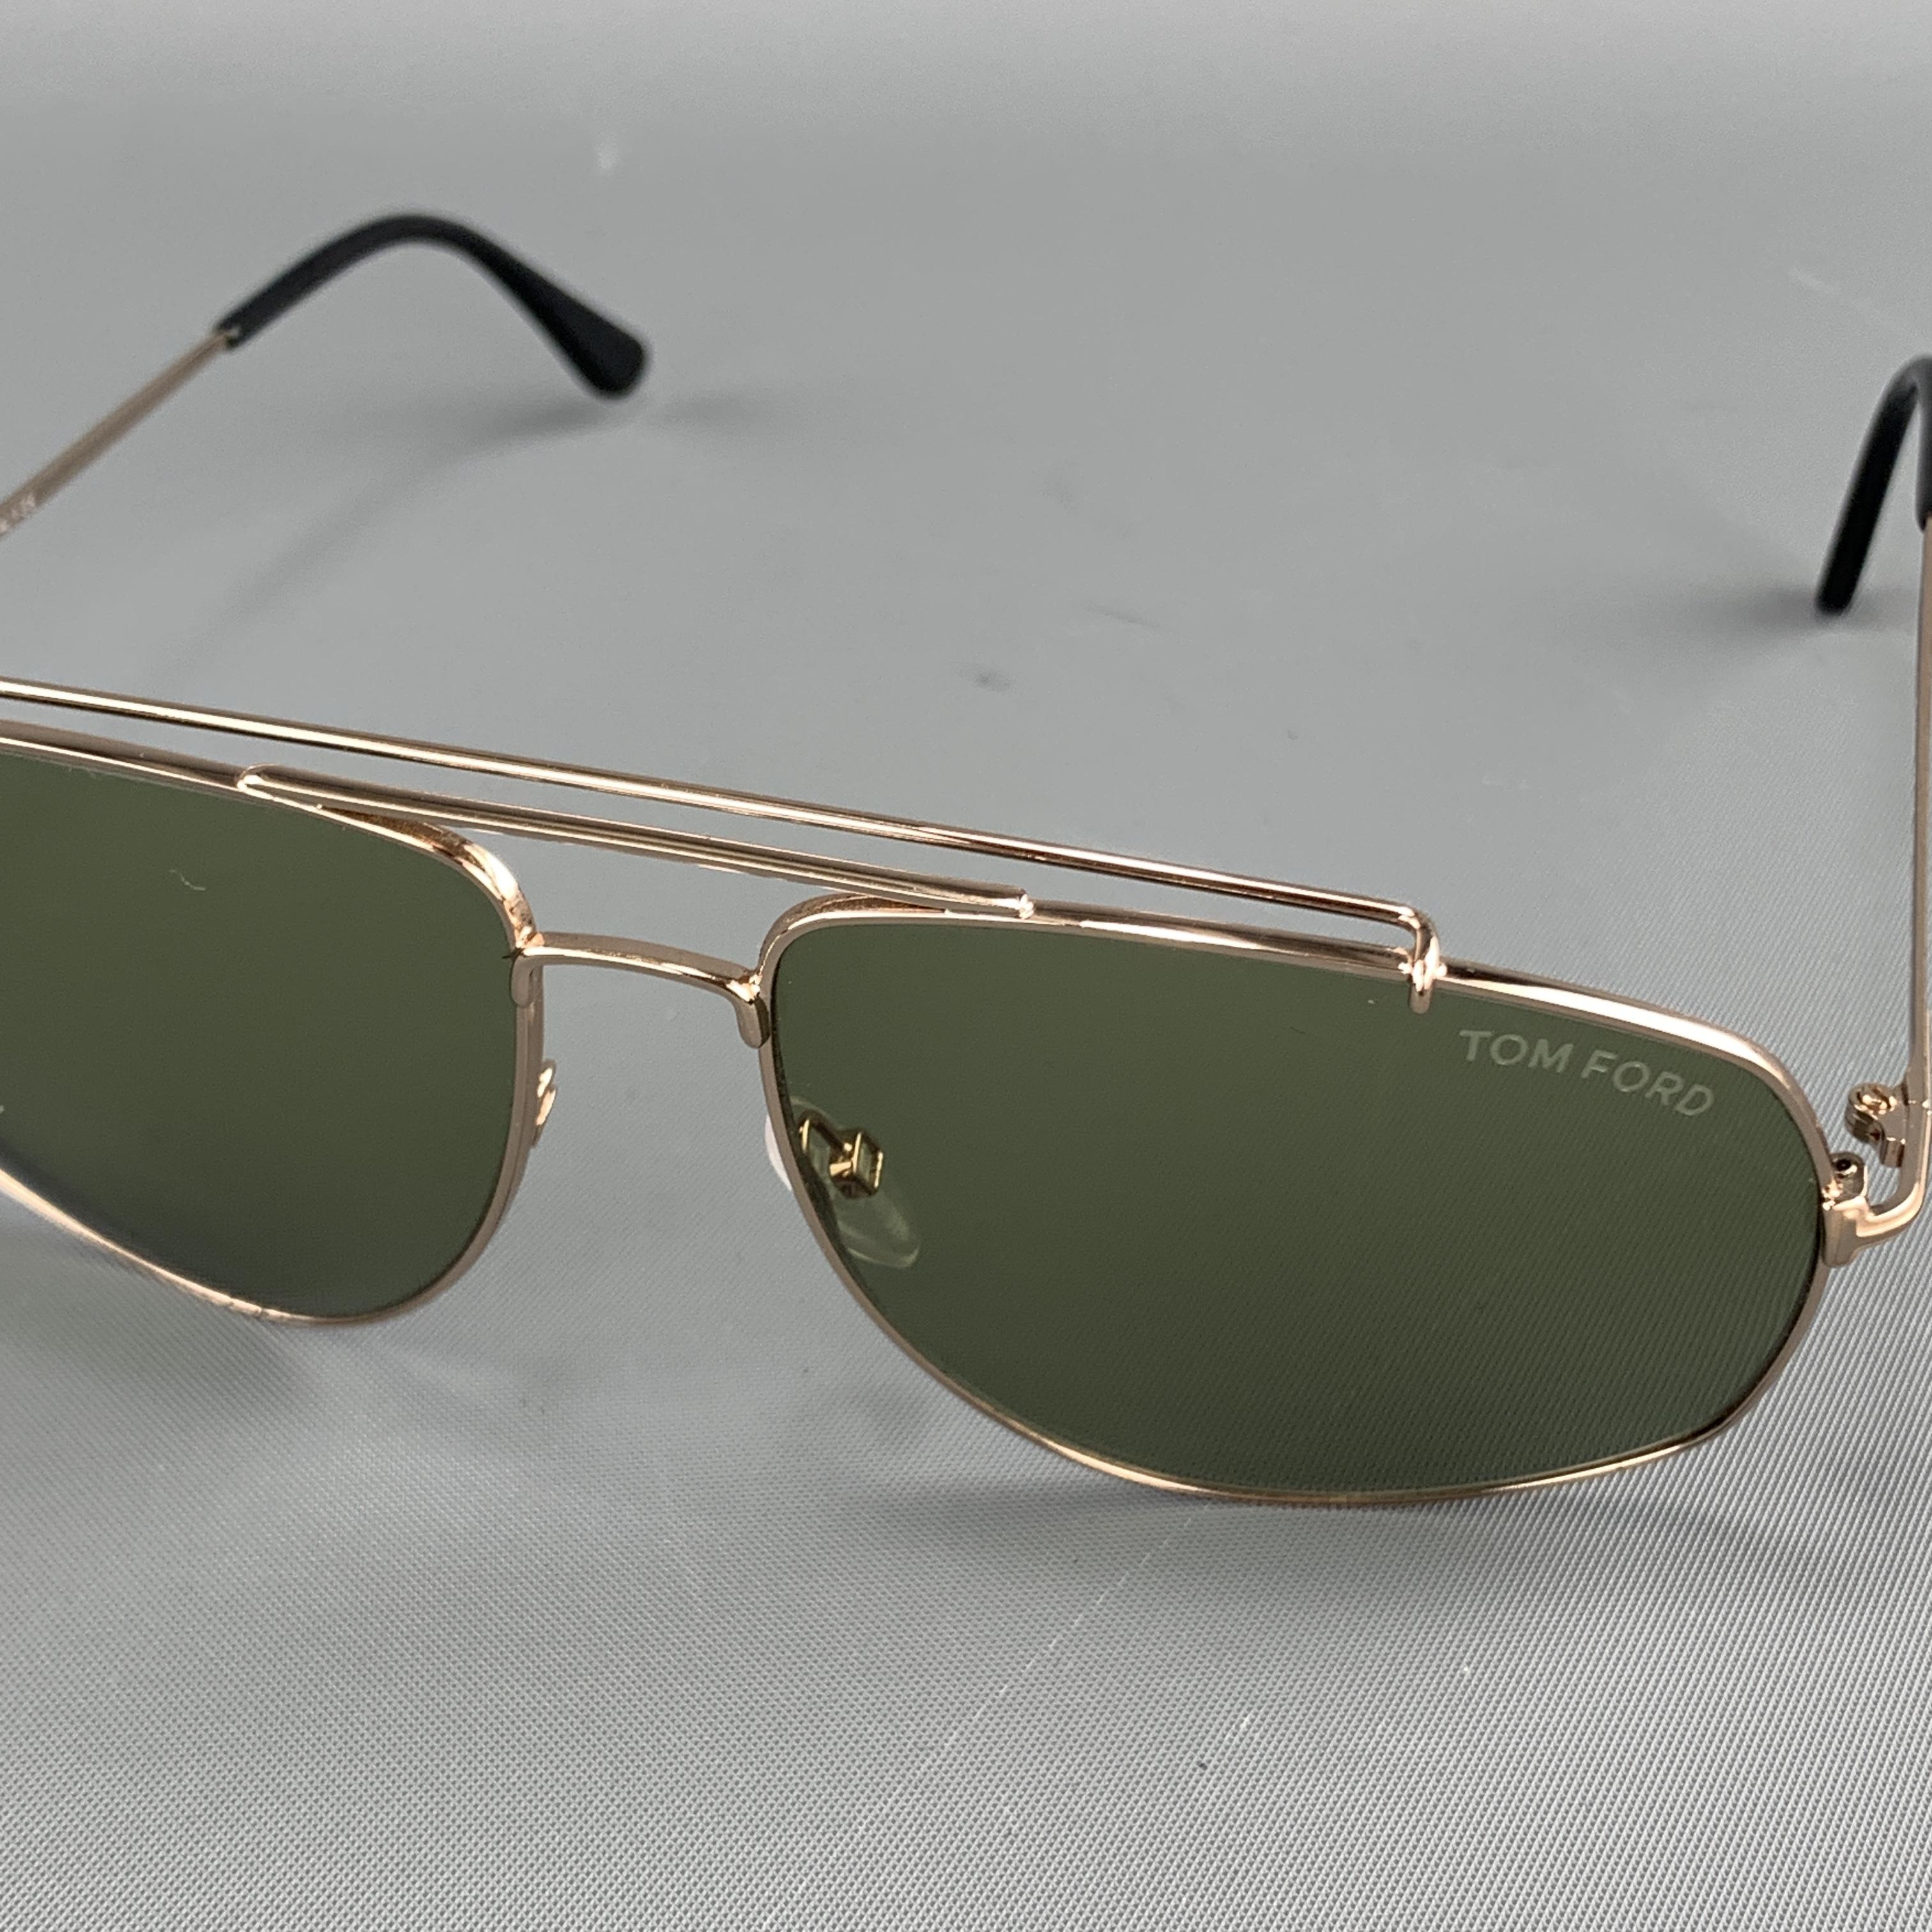 tom ford georges sunglasses